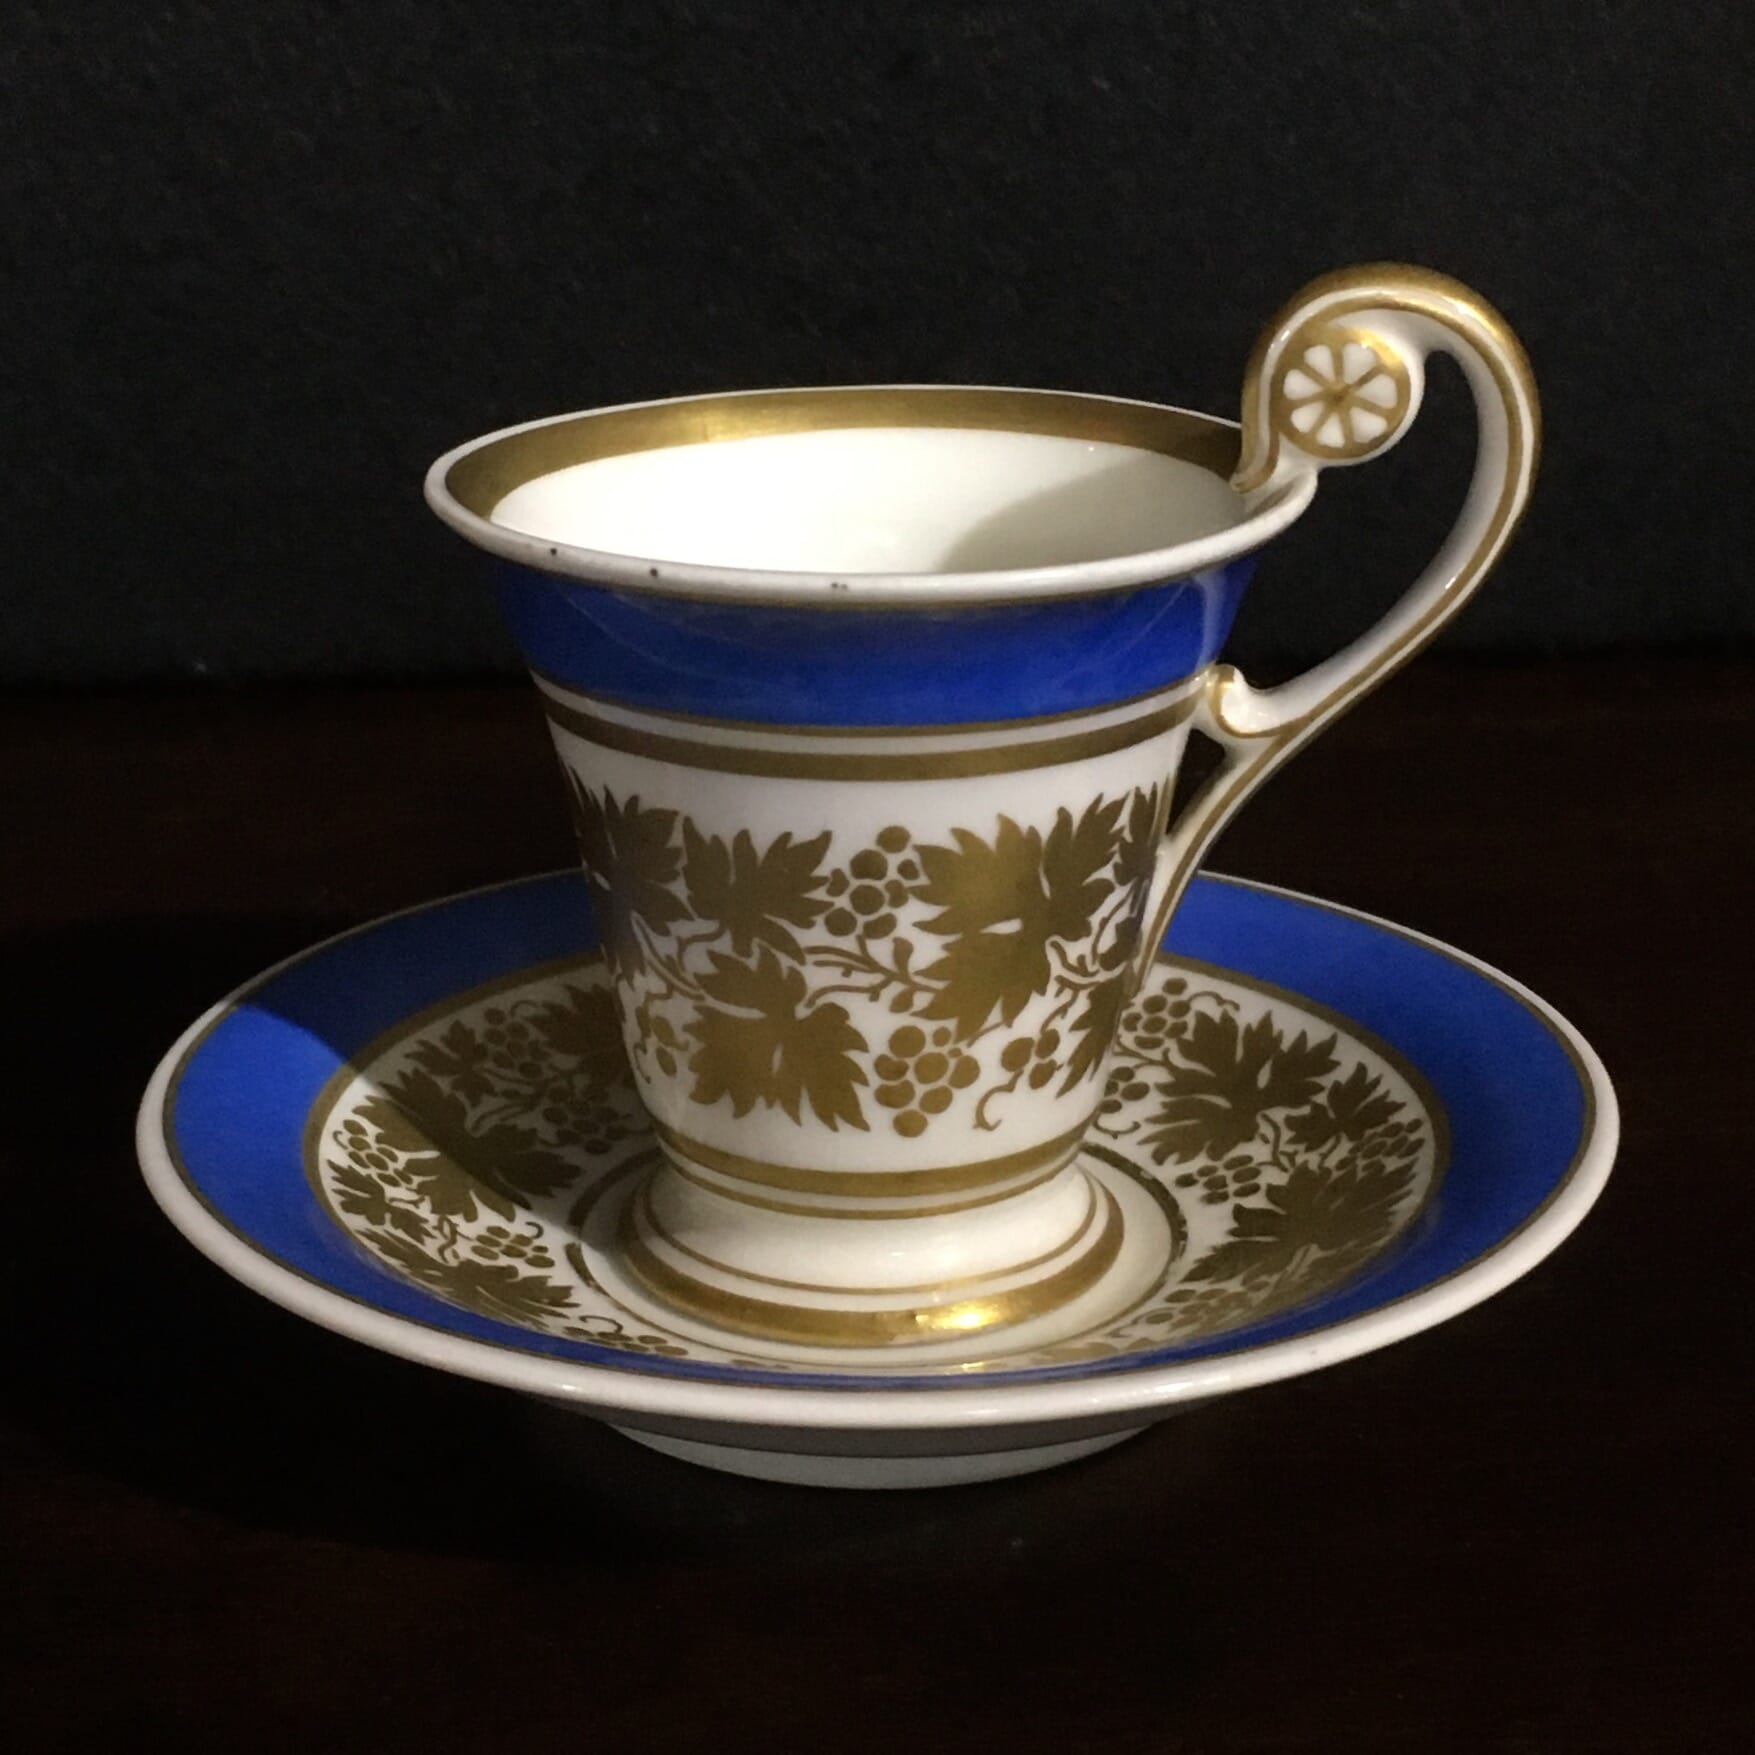 Berlin porcelain small cup and saucer in a classical style c. 1900-0